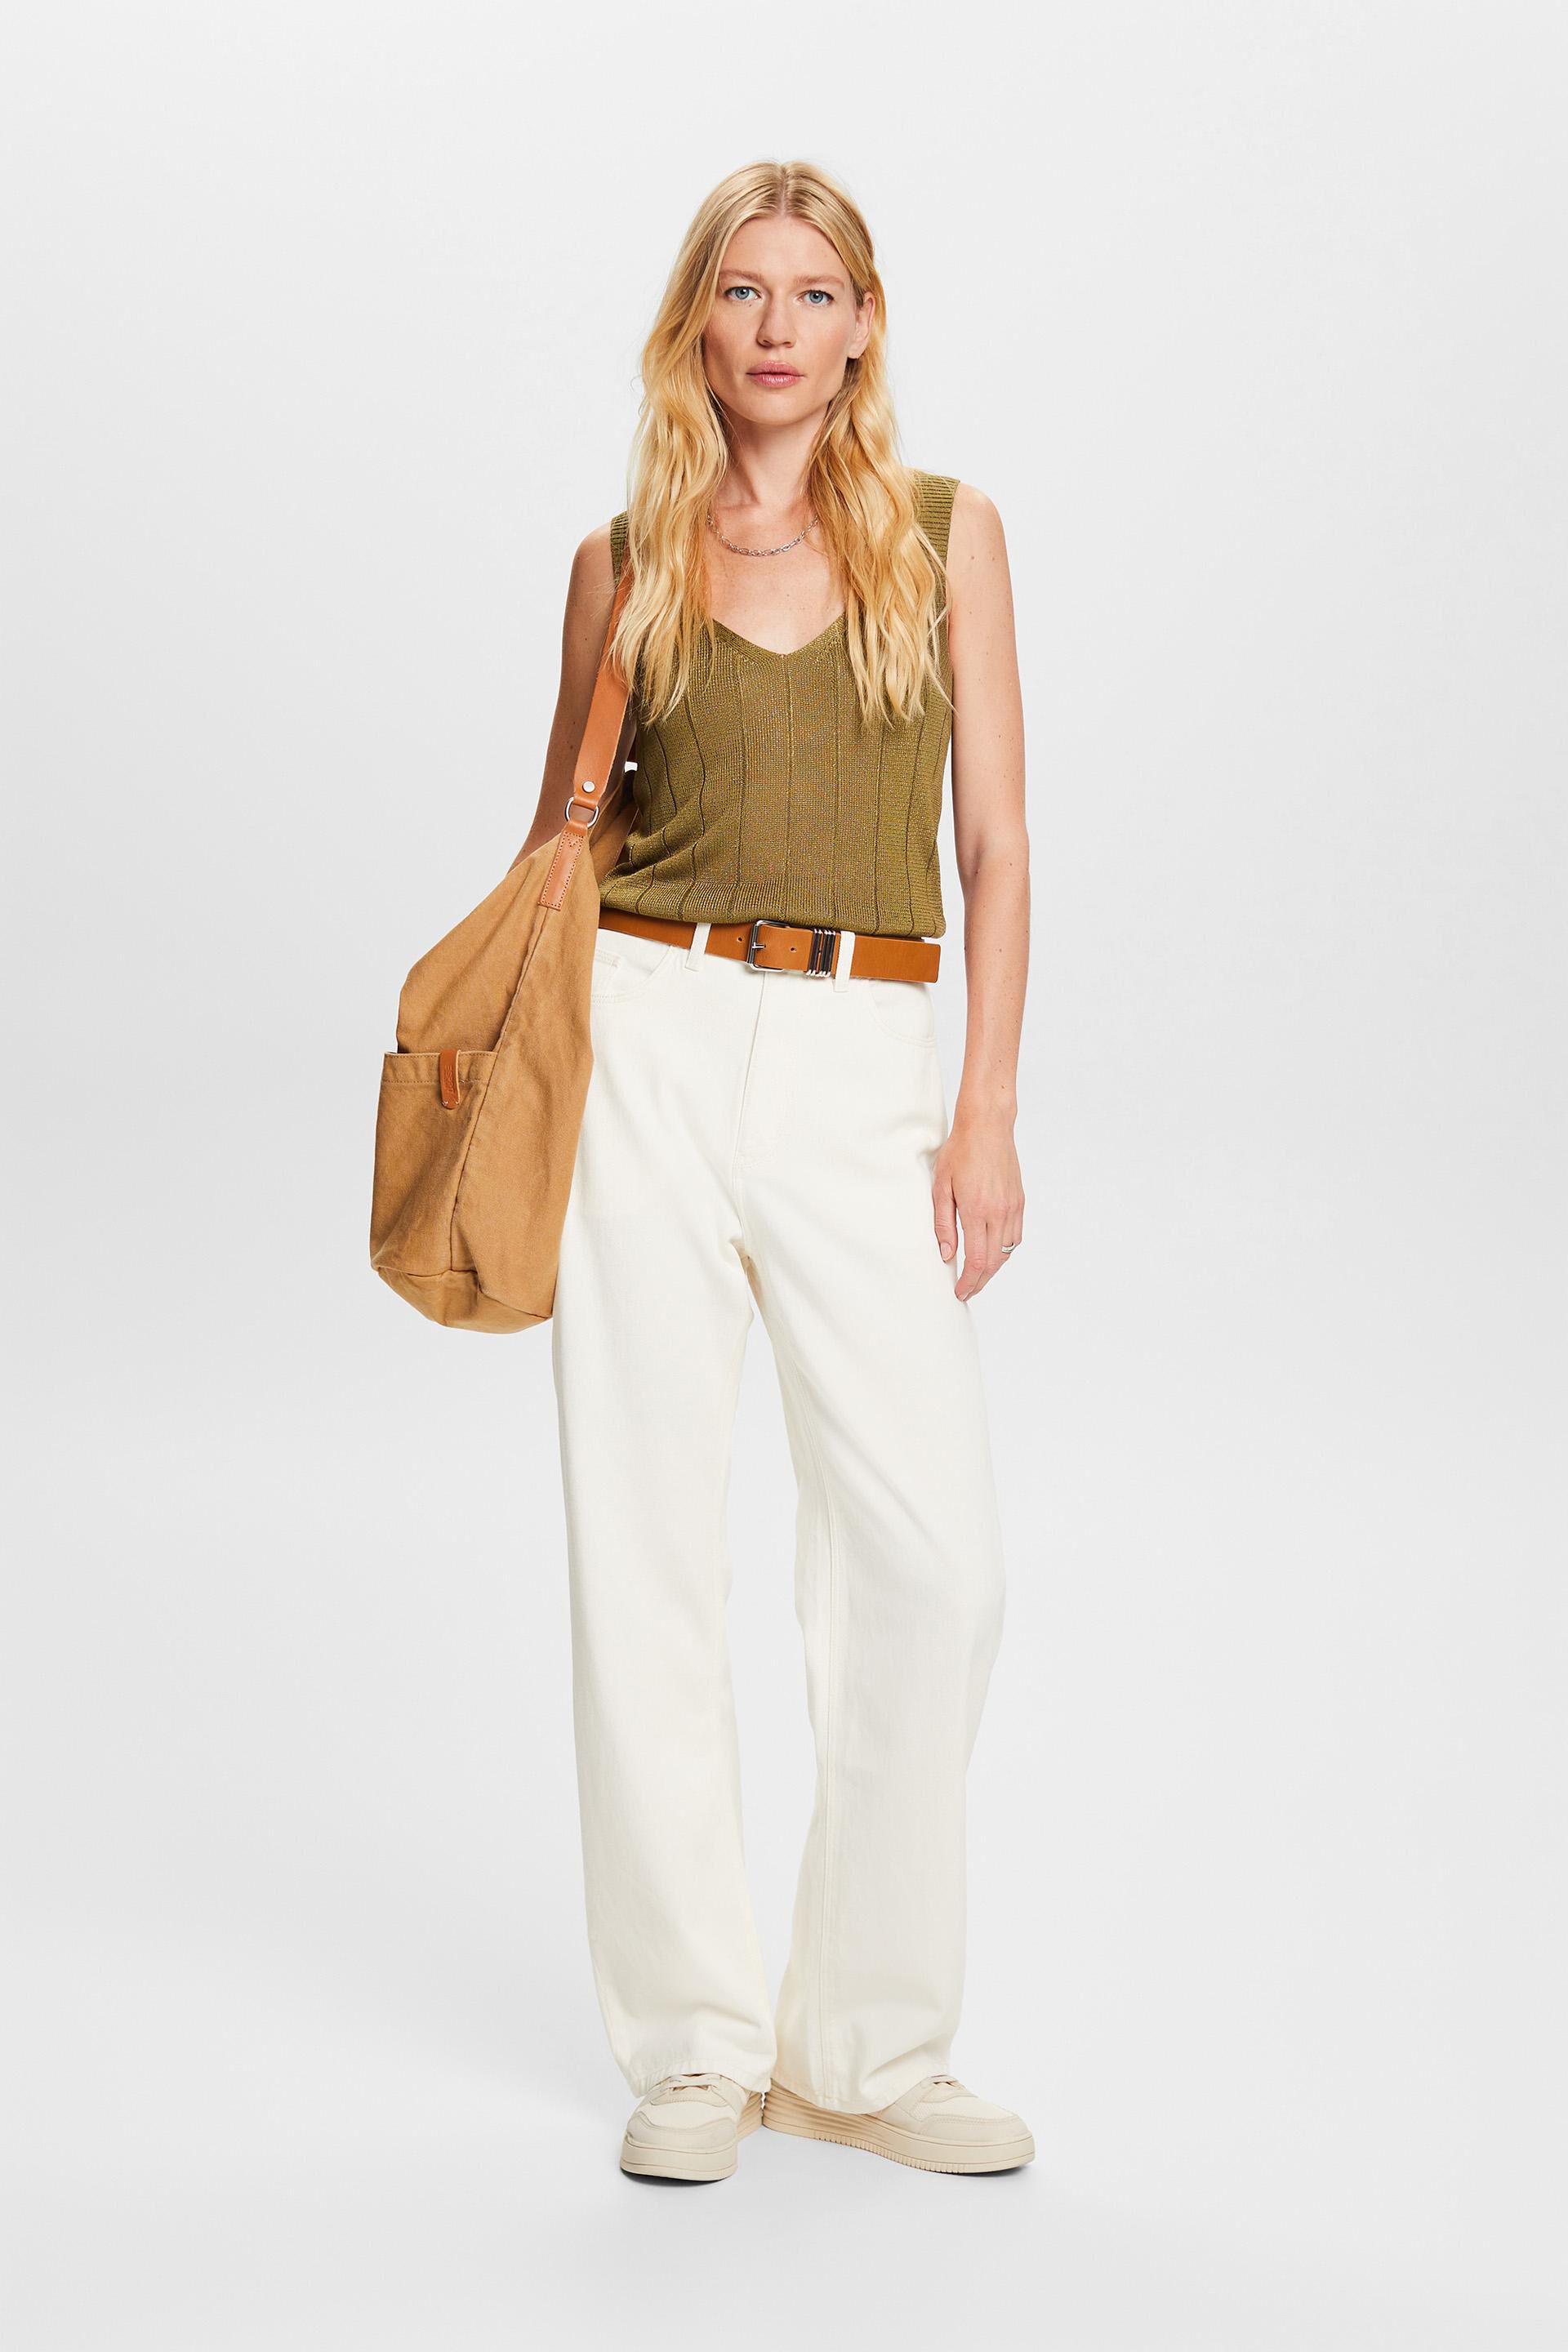 POLO RALPH LAUREN Twill Cropped Wide-Leg Pants, size: 12 , color